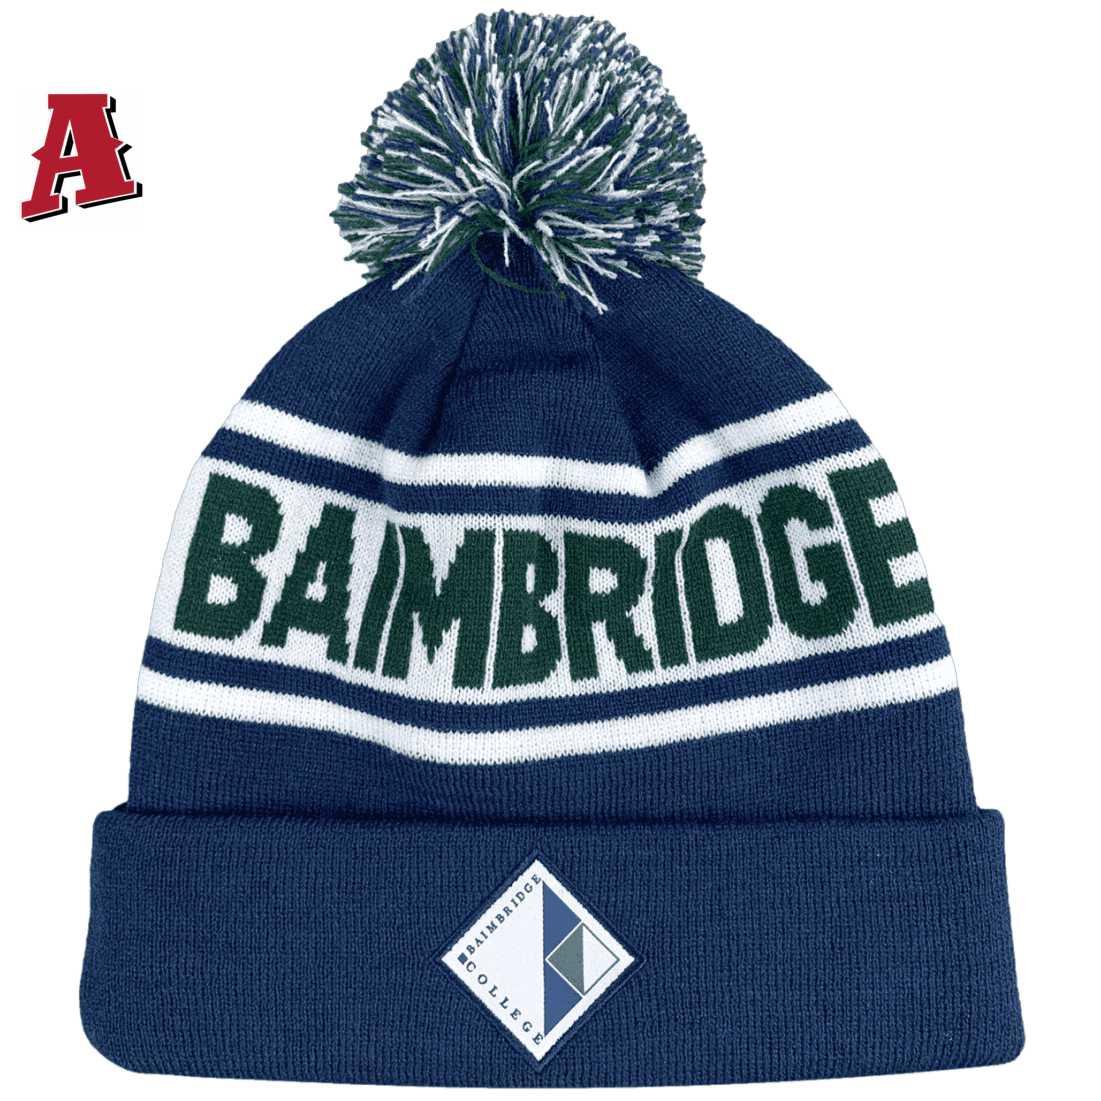 Baimbridge College Hamilton VIC Aussie Beanie Long Line or Roll up Cuff with Pom Pom available in any Colourway